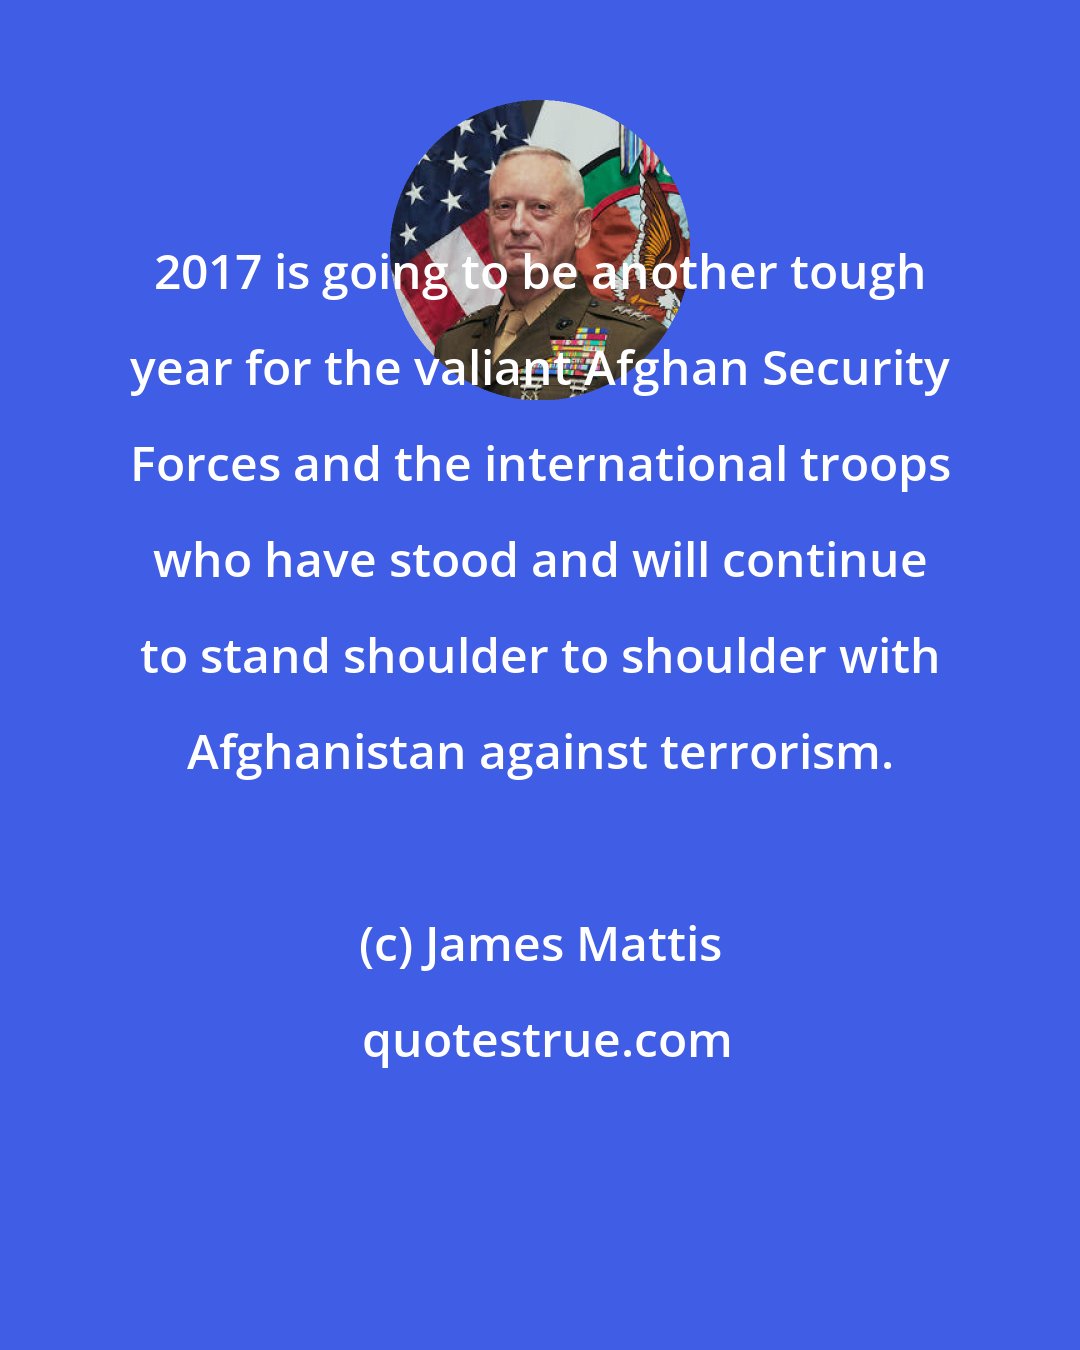 James Mattis: 2017 is going to be another tough year for the valiant Afghan Security Forces and the international troops who have stood and will continue to stand shoulder to shoulder with Afghanistan against terrorism.